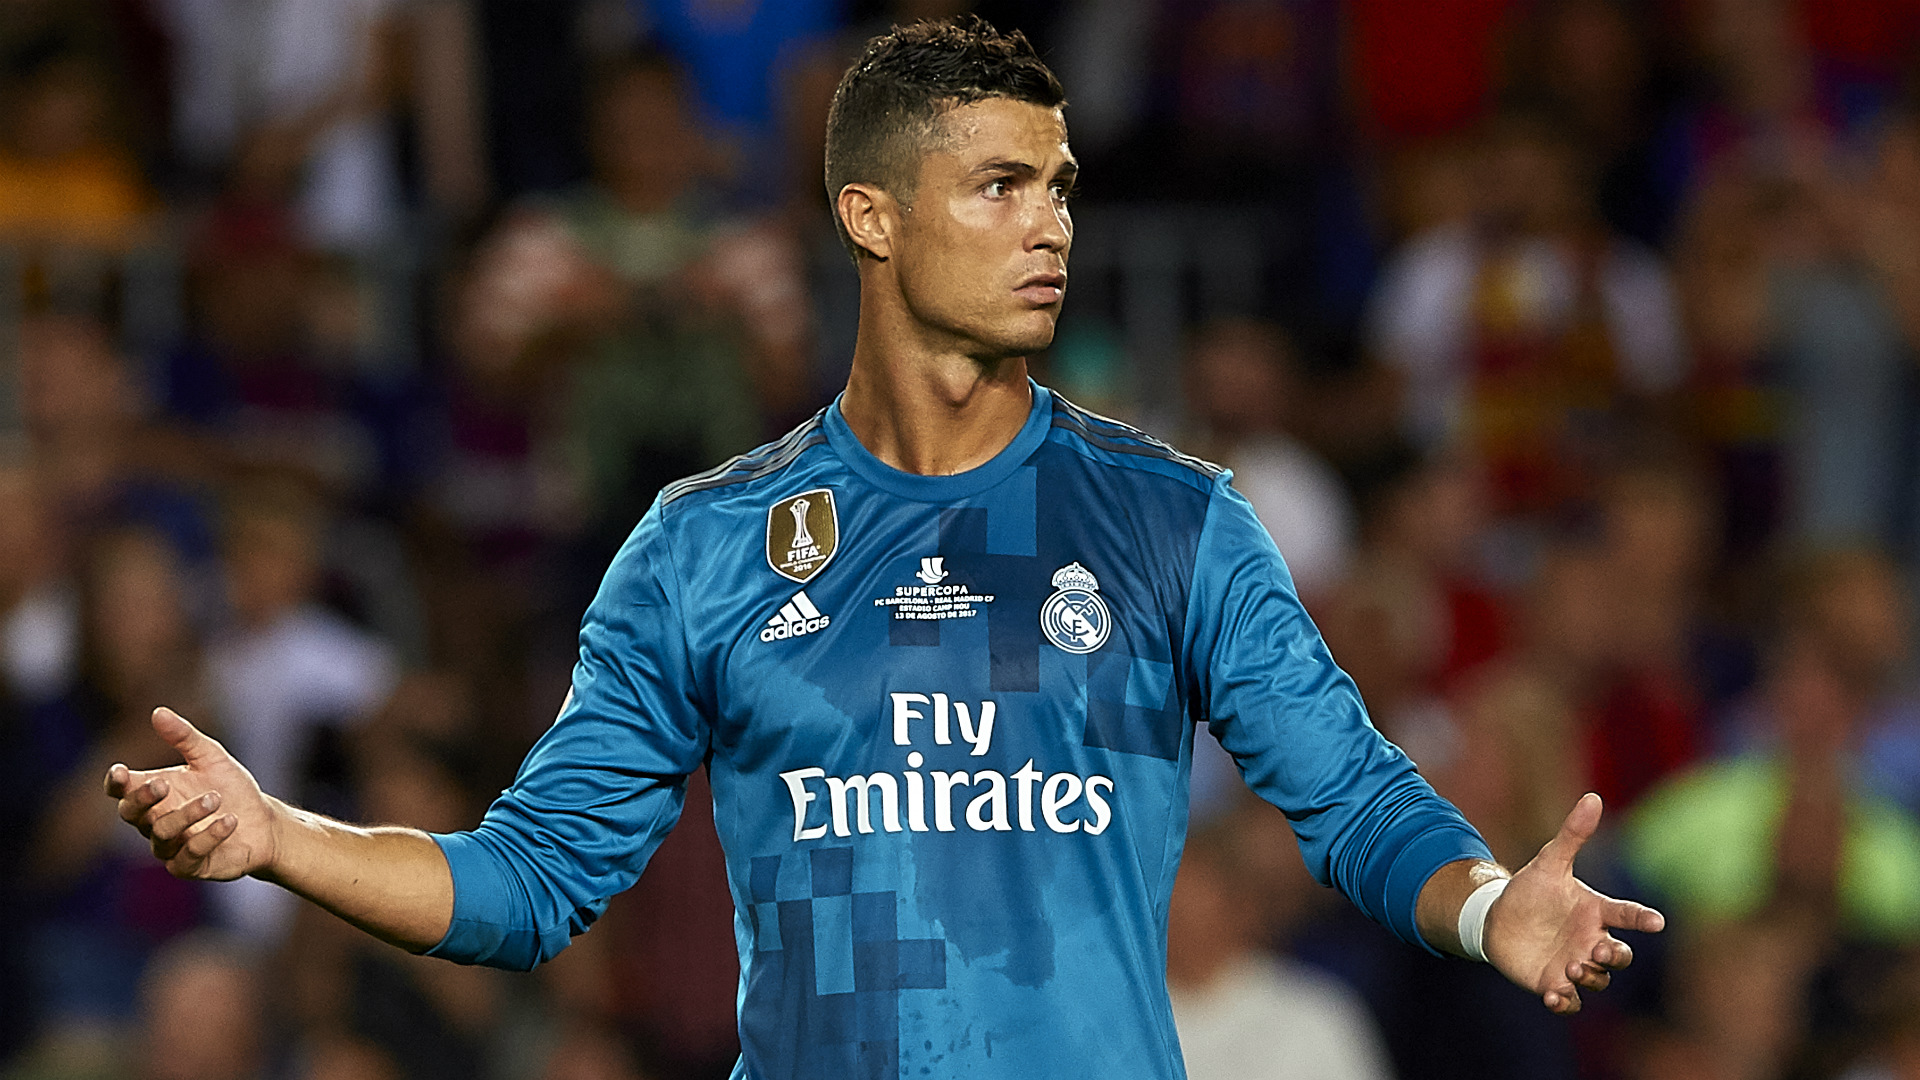 Cristiano Ronaldo transfer news: 'This team and his city' Real Madrid exit ruled out by Zidane | Goal.com